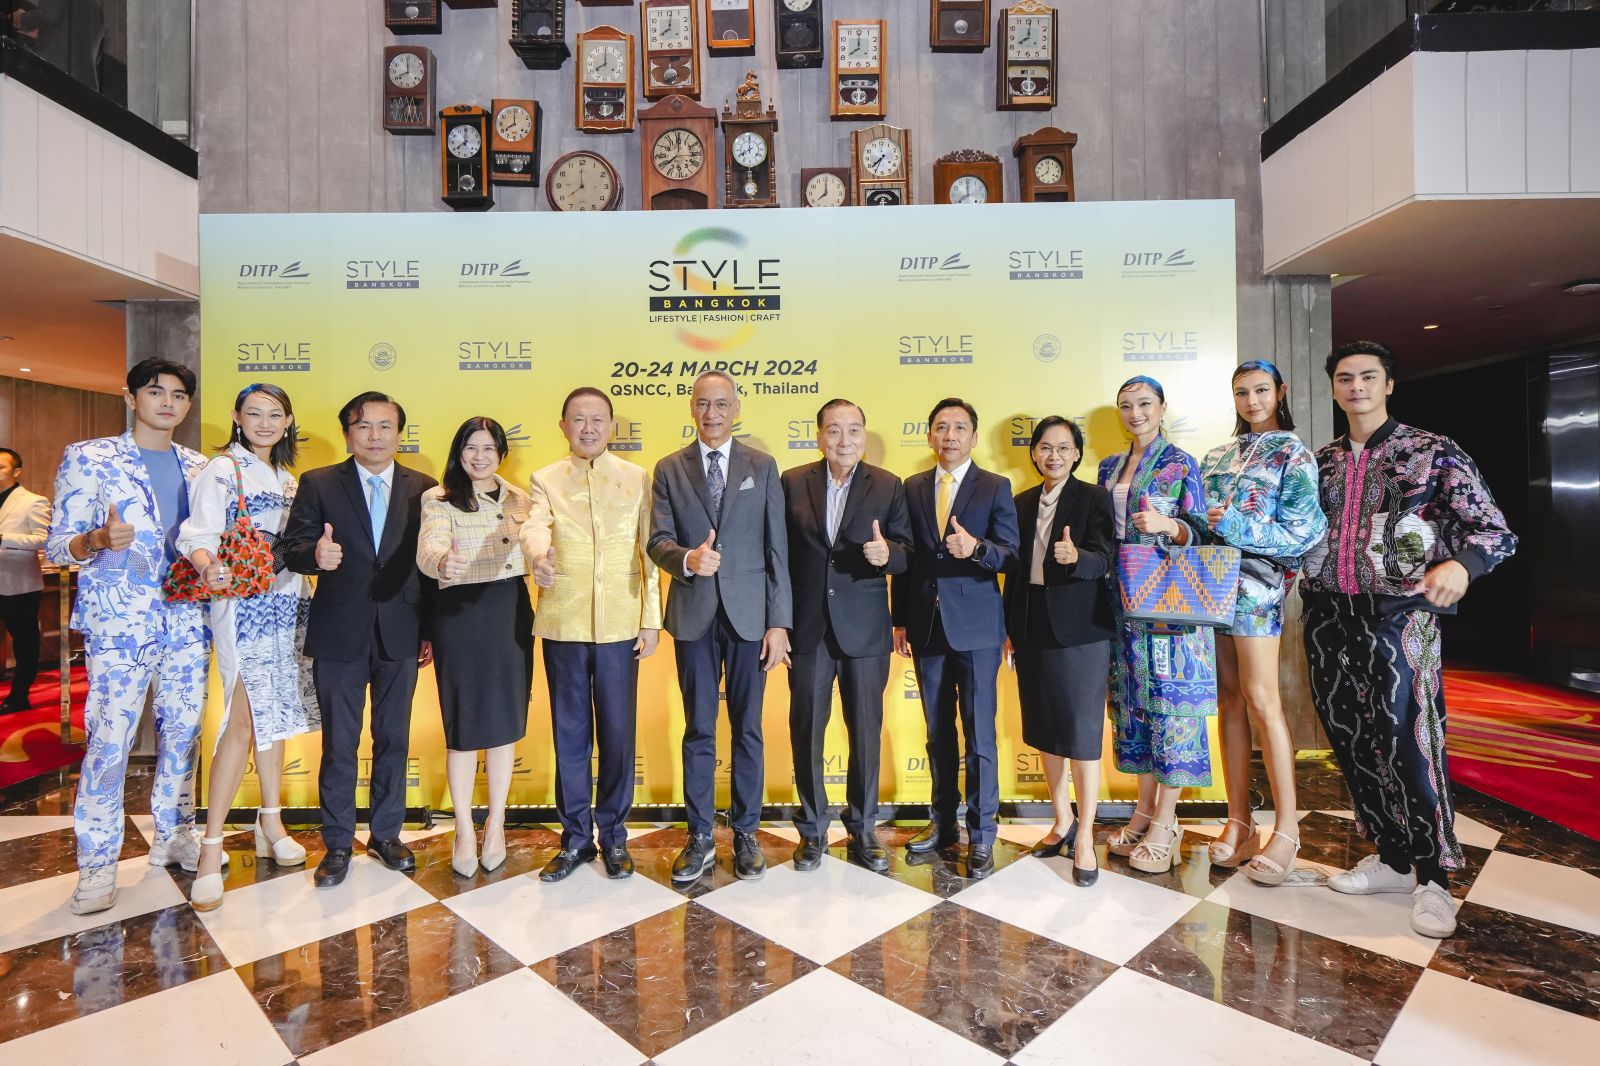 DITP and Board of Trade of Thailand Join Forces at STYLE Bangkok 2024 Boosting Thai Soft Power through SMEs’ ESG Product Showcases